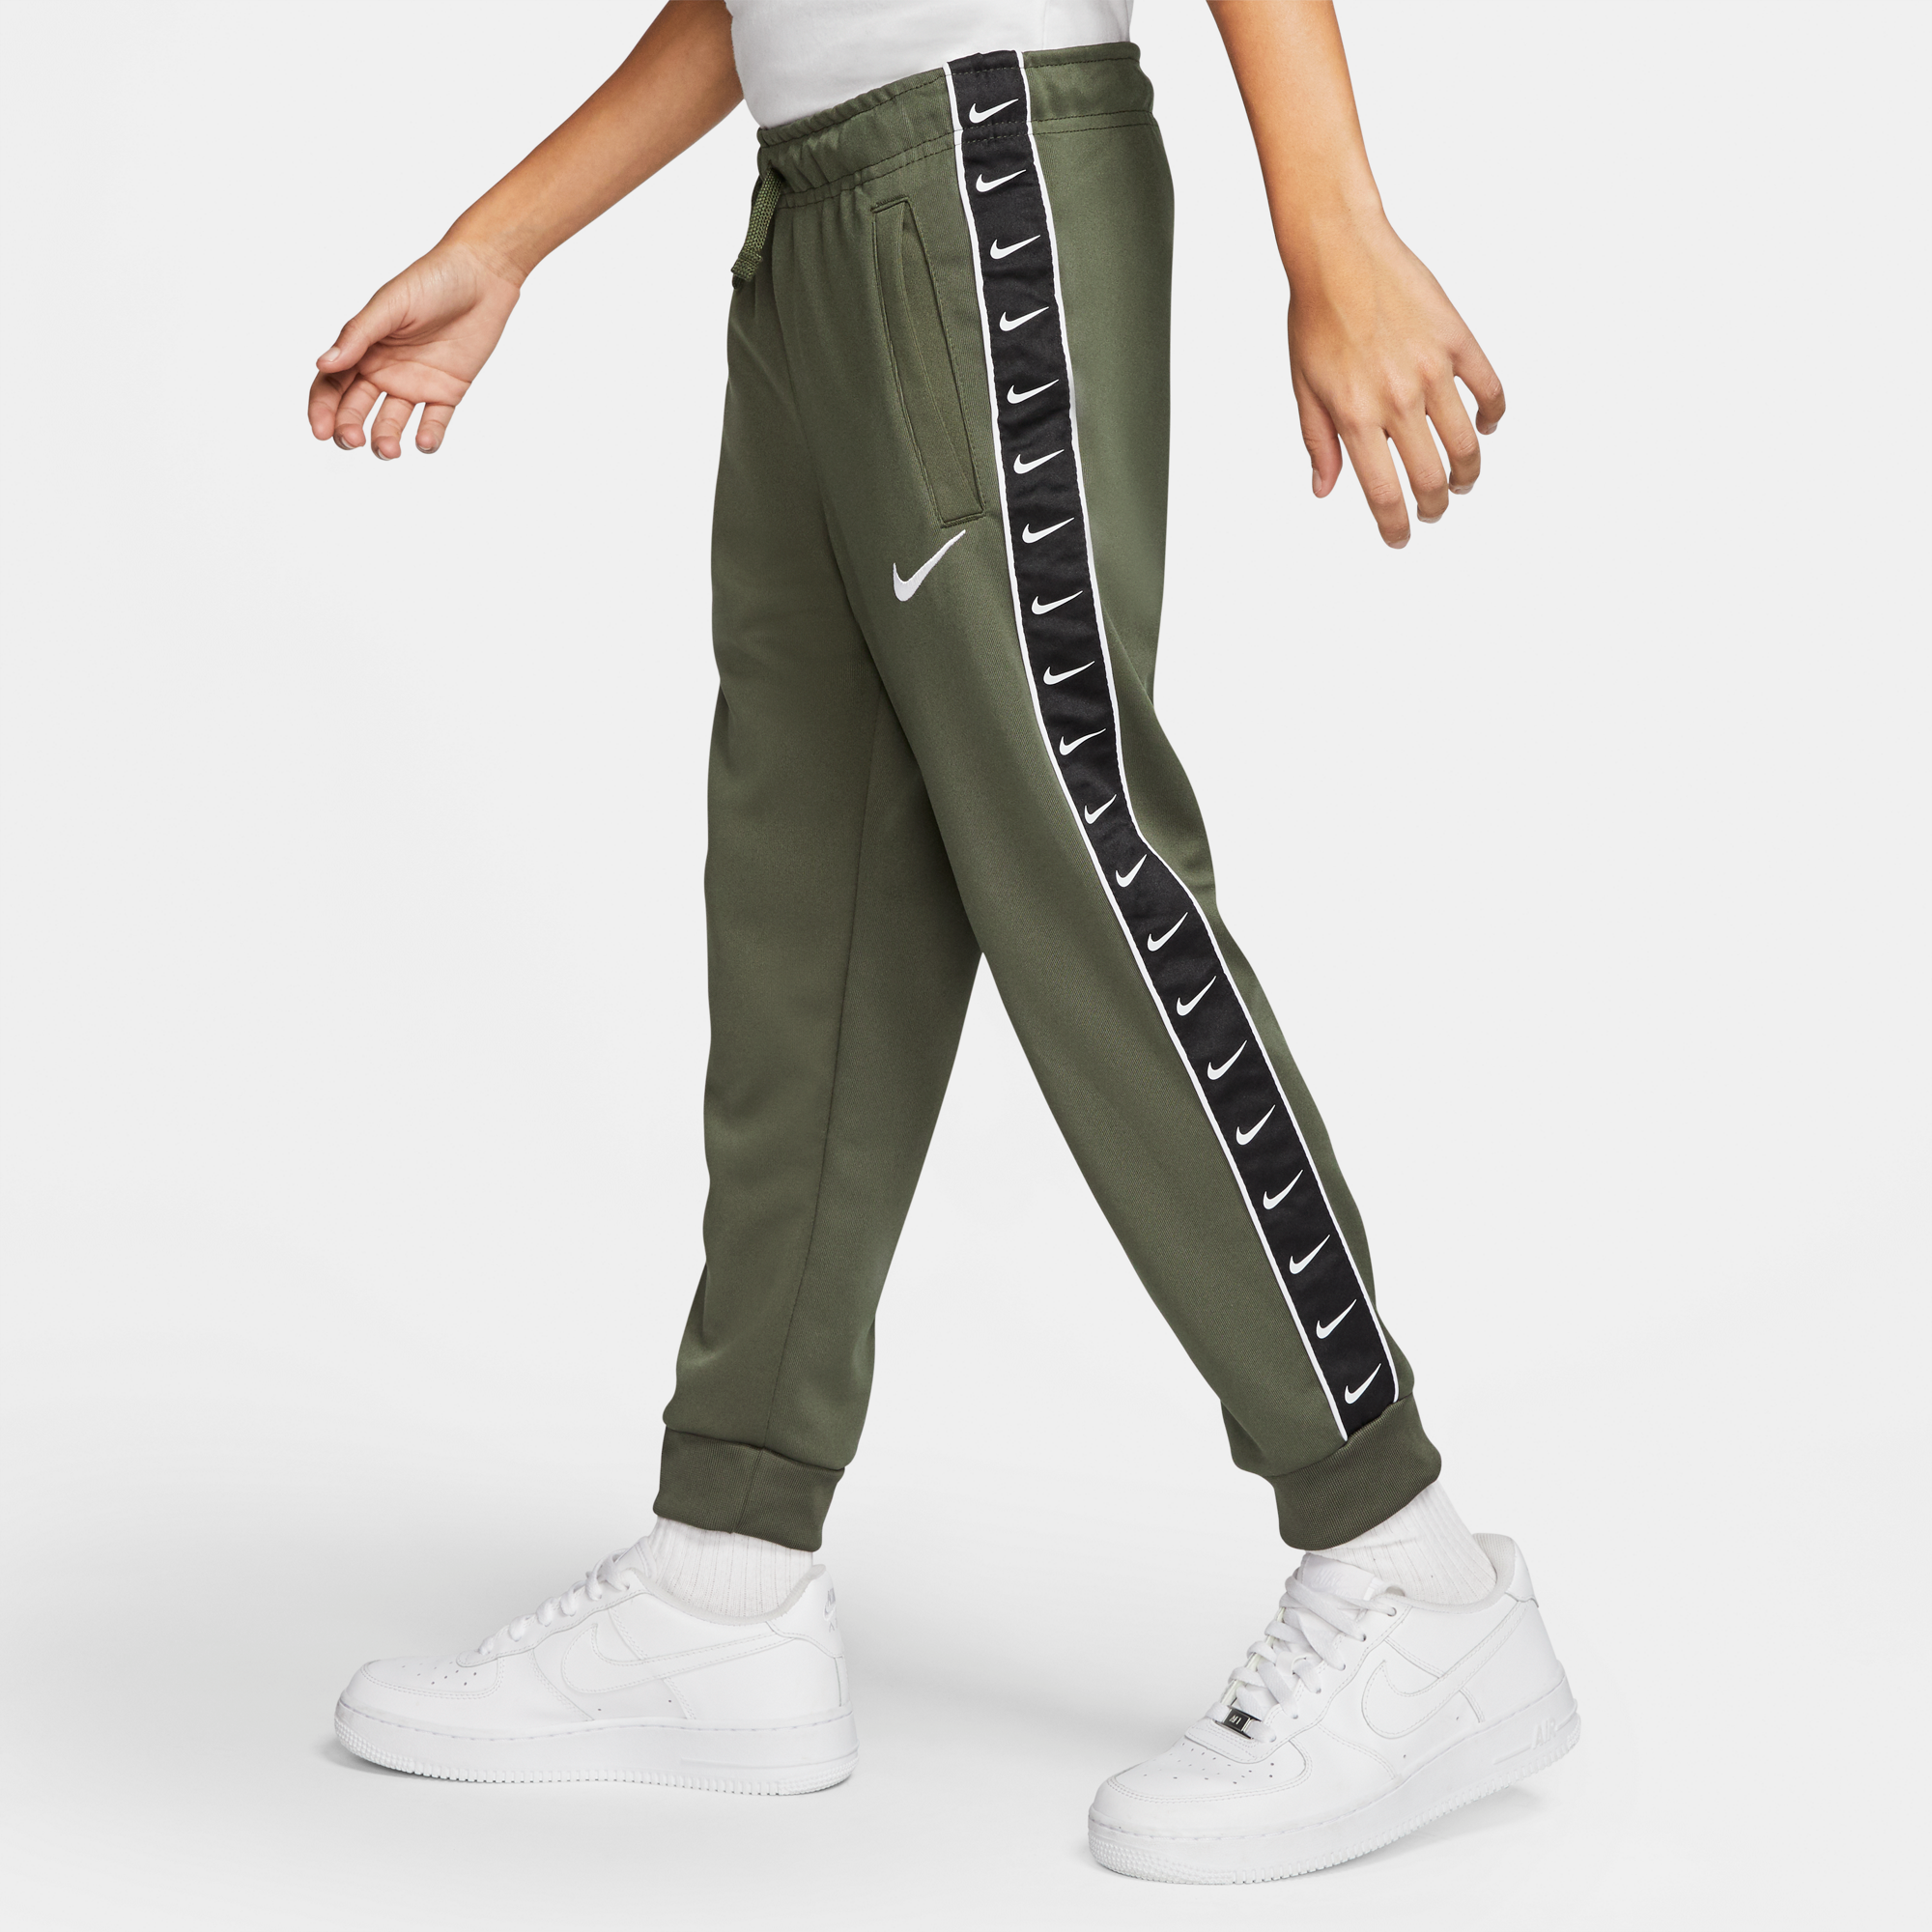 nike pants with swoosh down the side